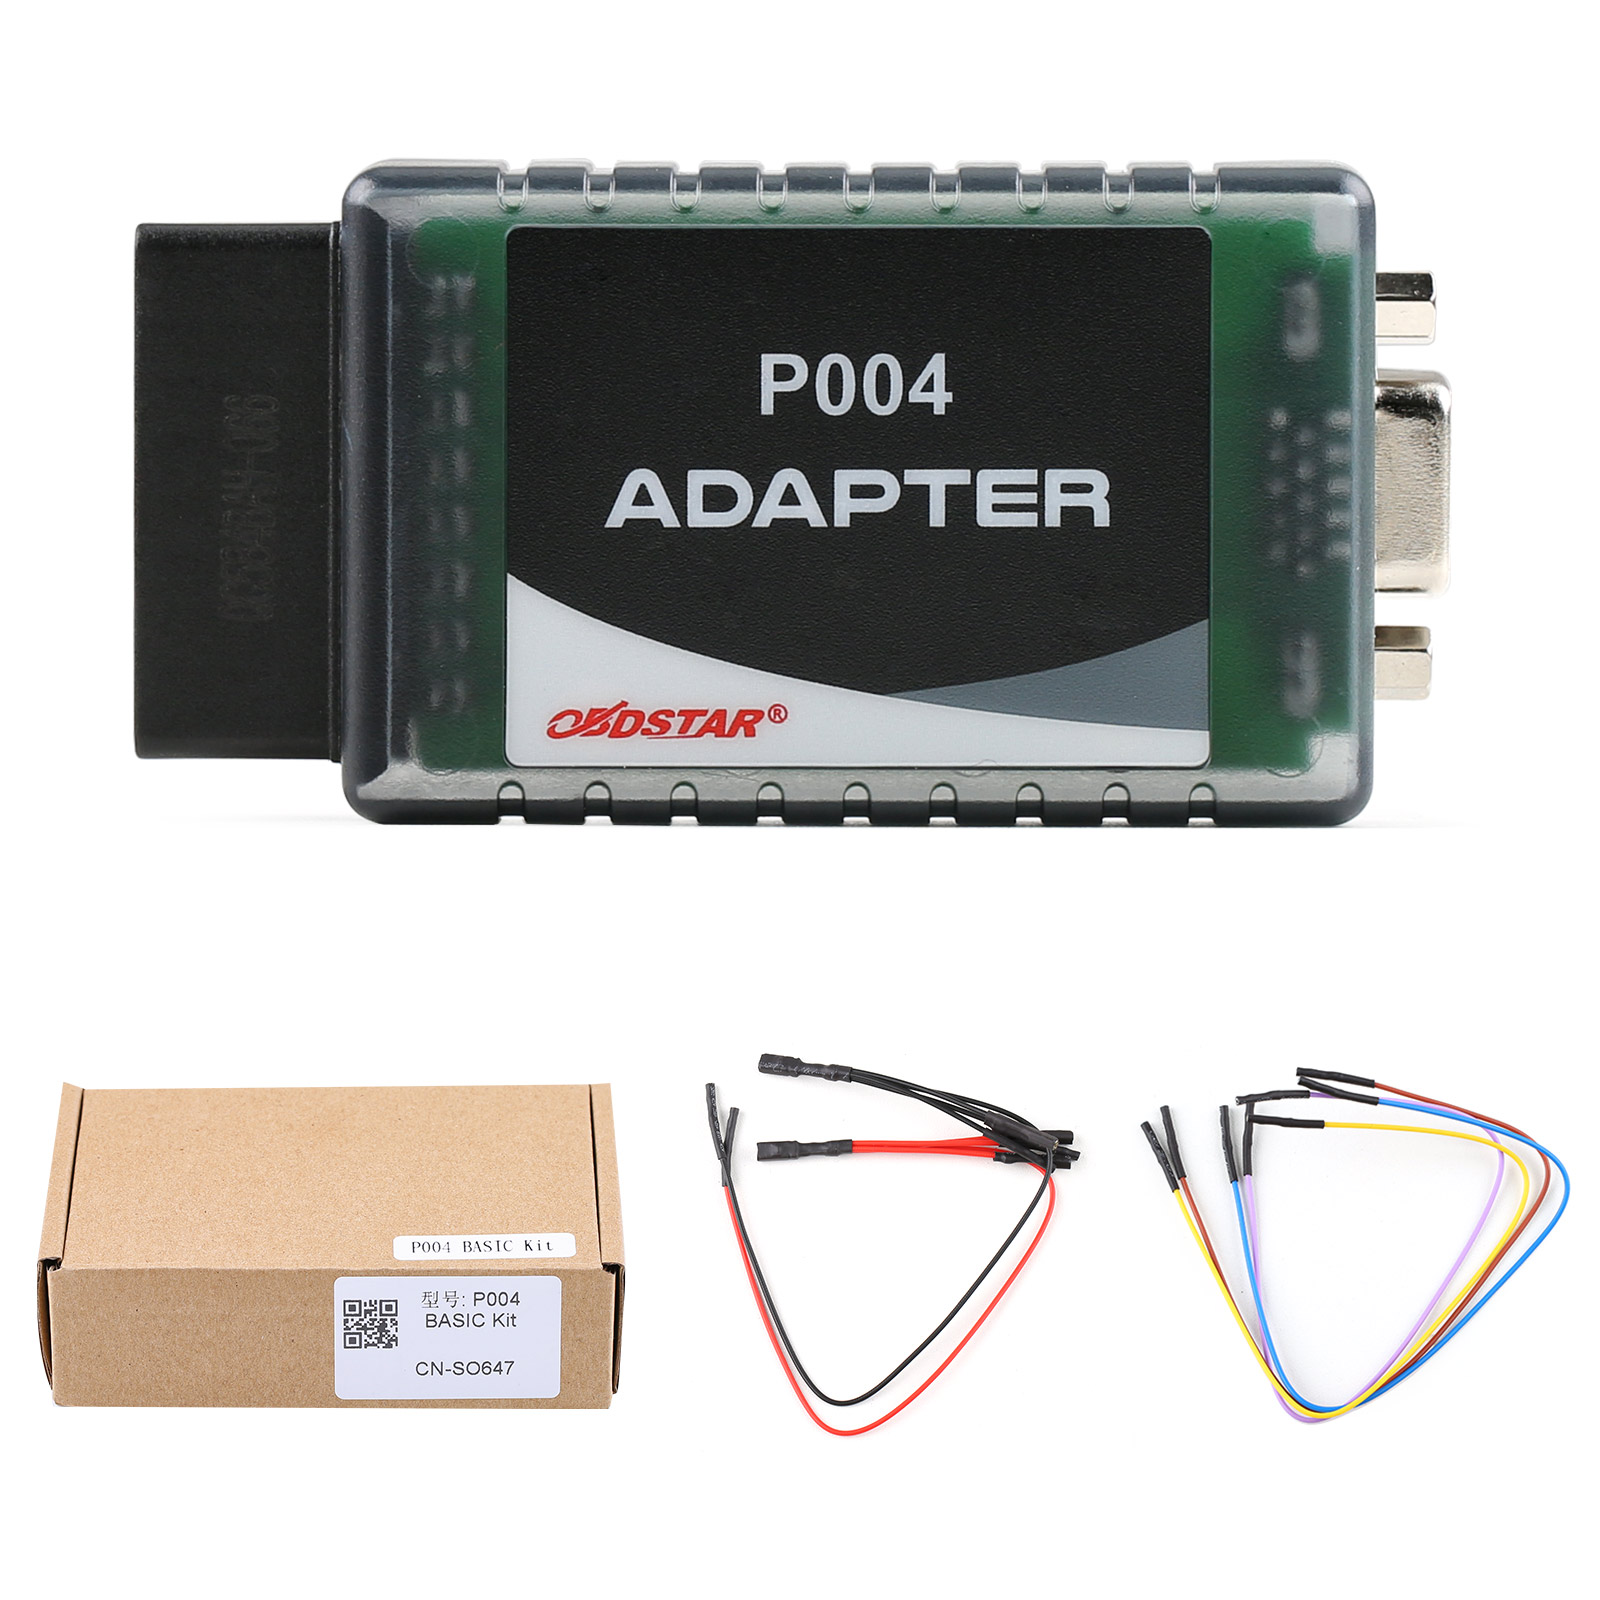 OBDSTAR P004 Adapter and Jumper Airbag Reset Kit